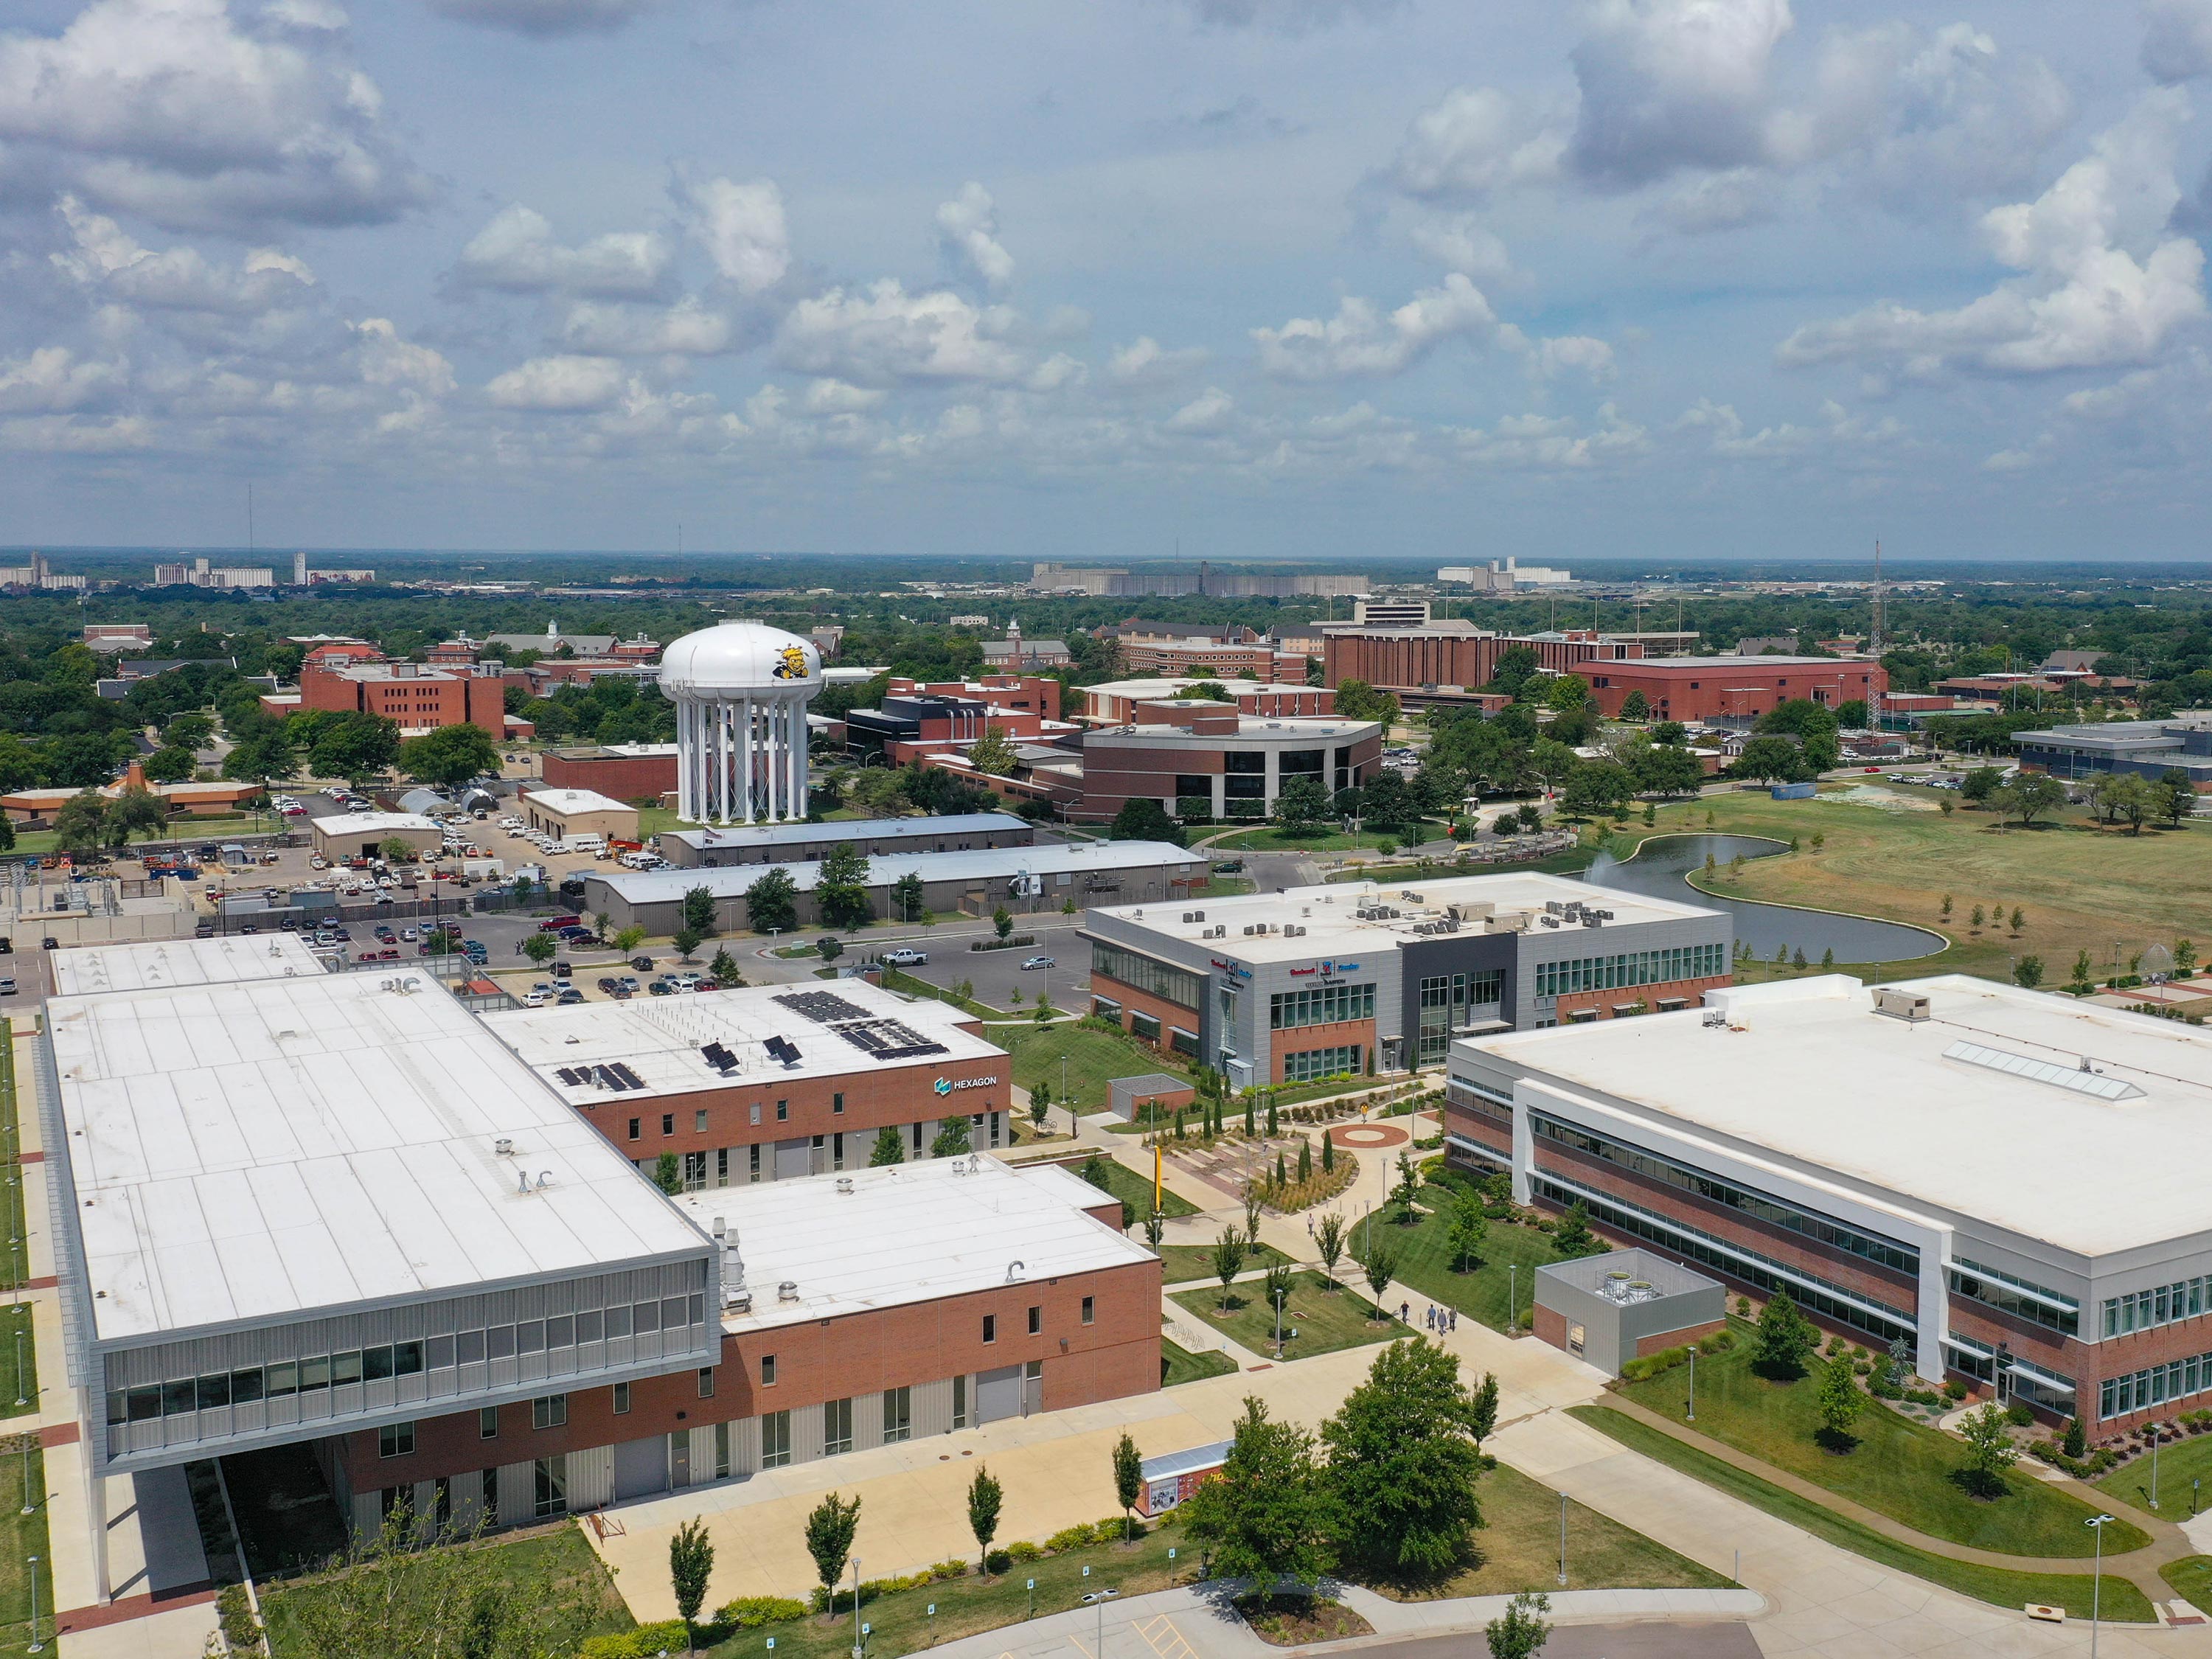 Aerial view of innovation campus looking northwest